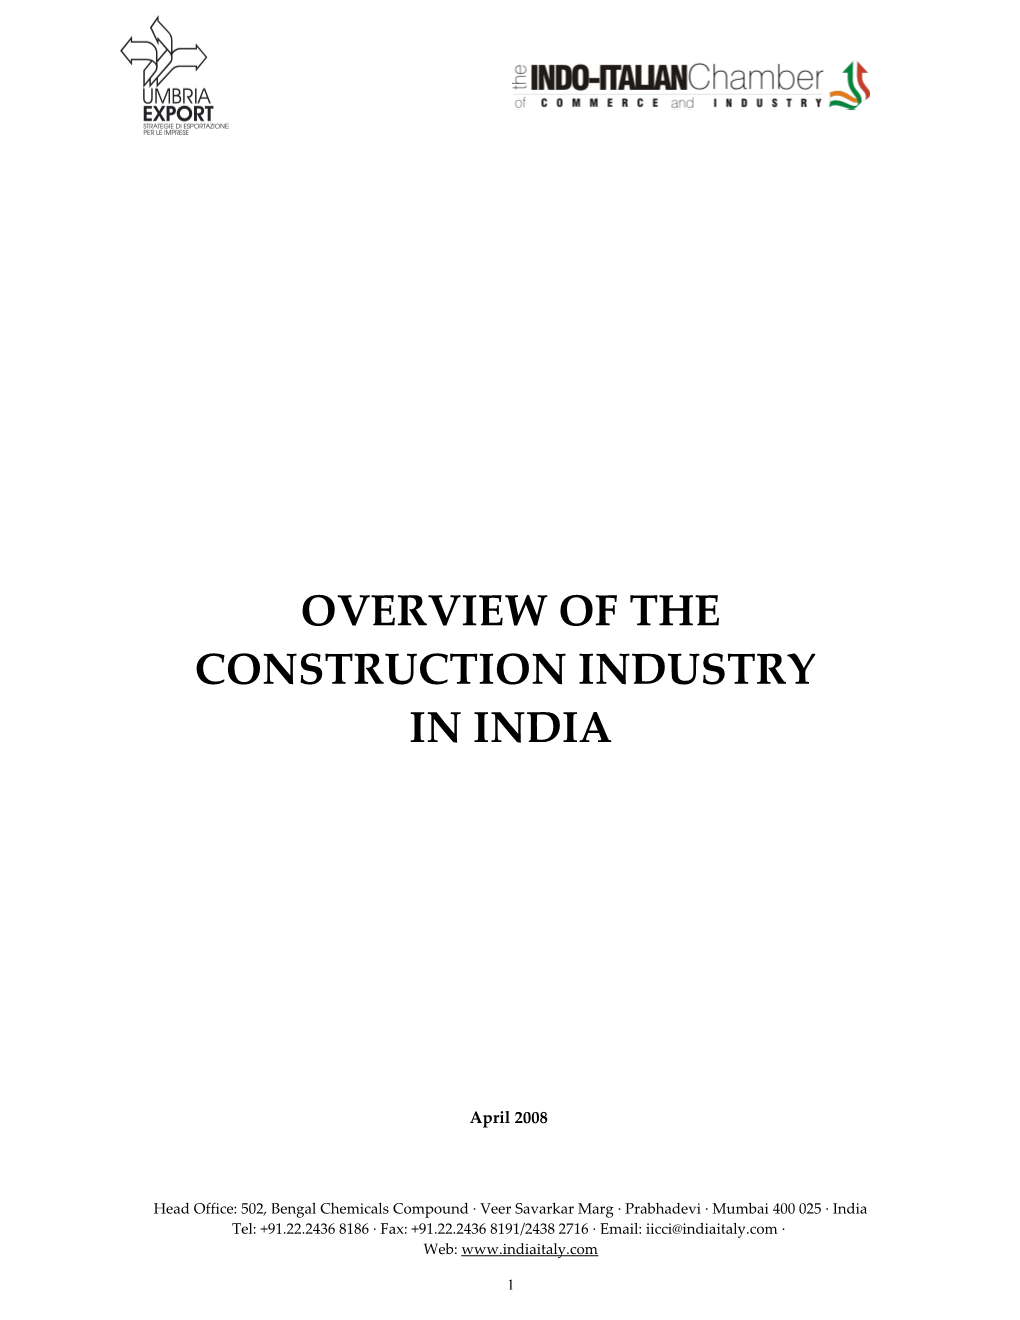 Overviewofthe Construction Industry